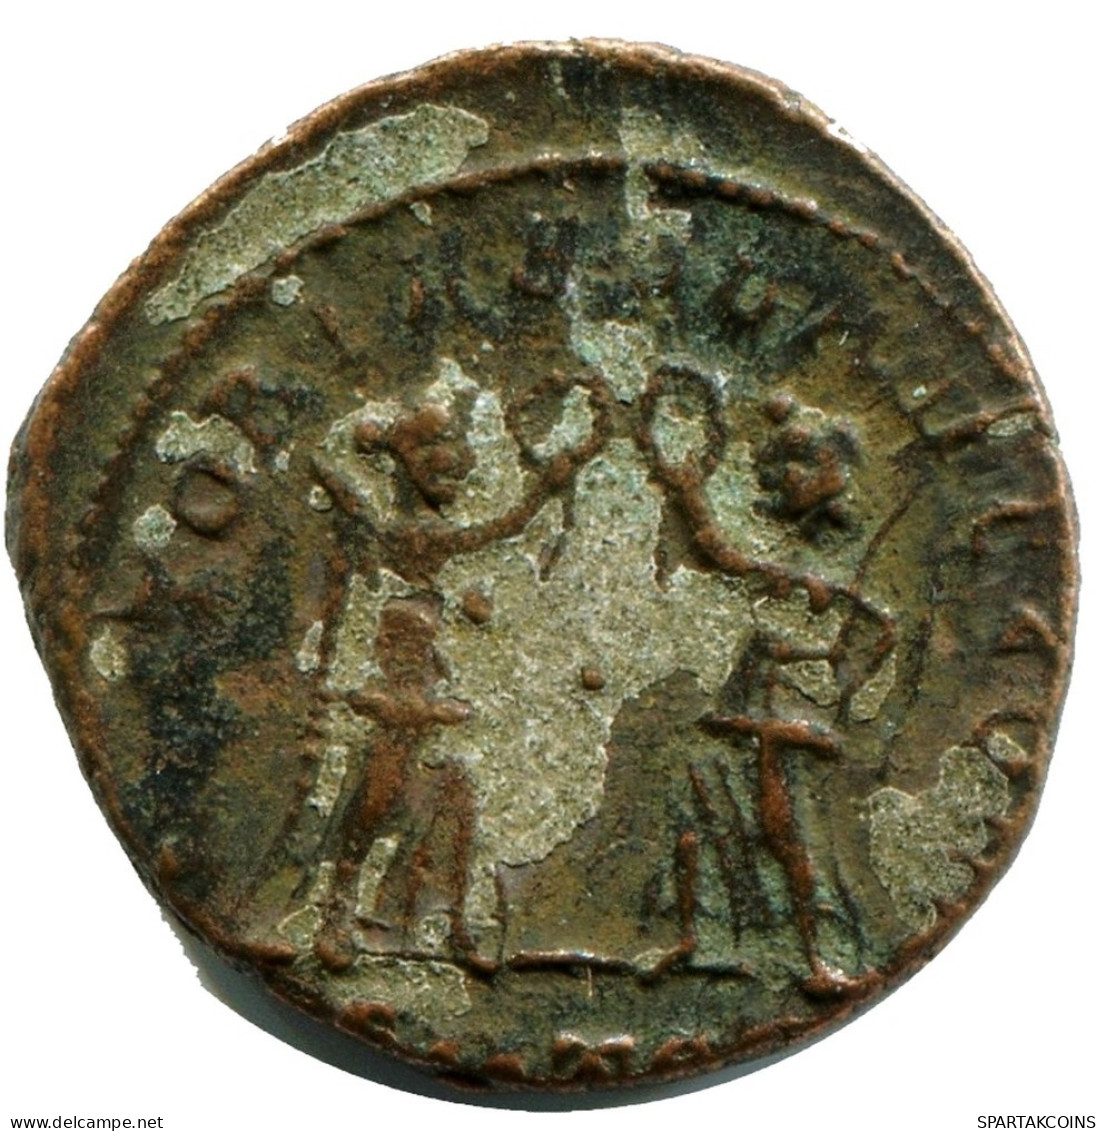 CONSTANS MINTED IN THESSALONICA FROM THE ROYAL ONTARIO MUSEUM #ANC11881.14.D.A - El Imperio Christiano (307 / 363)